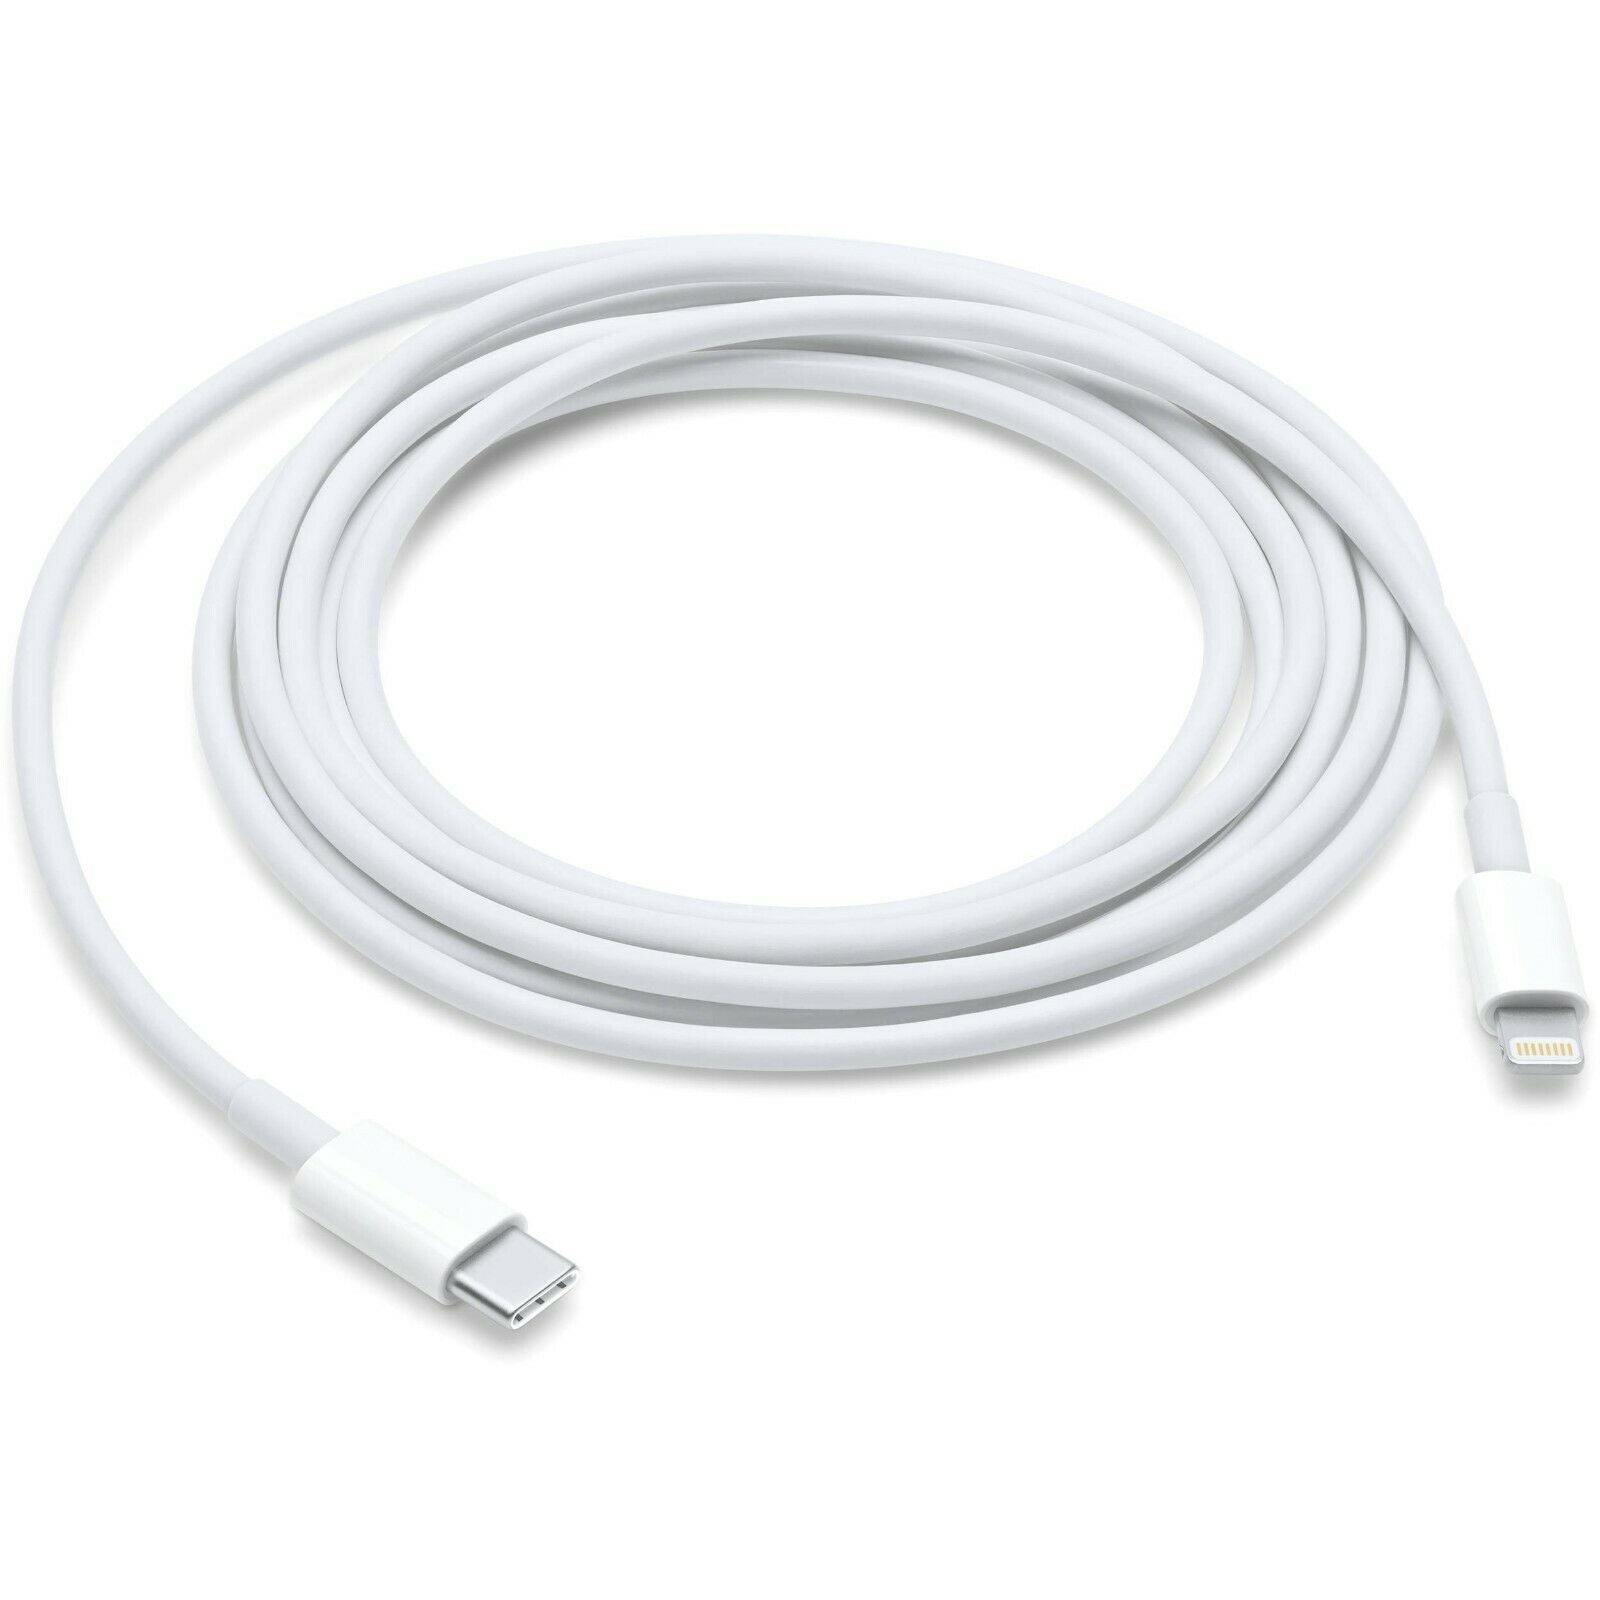 Apple MKQ42AM/A USB-C To Lightning Cable (2M) A1702 GB